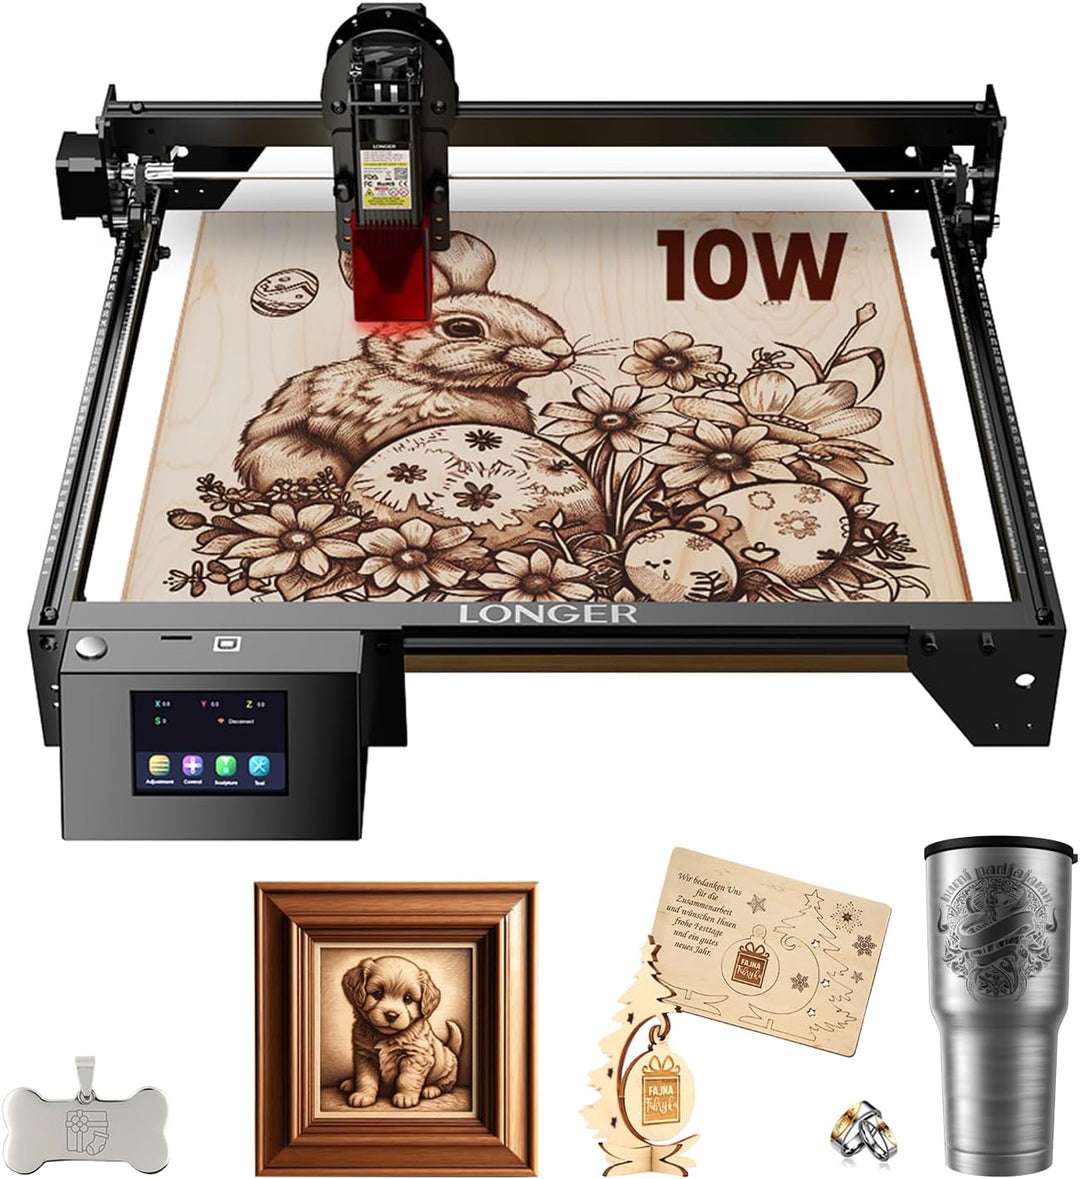 Longer Ray5 laser engraving machine, 60W laser cutting machine, 10W precision laser engraving machine for acrylic, wood, and metal, with emergency stop, engraving machine with a 3.5-inch touch screen.